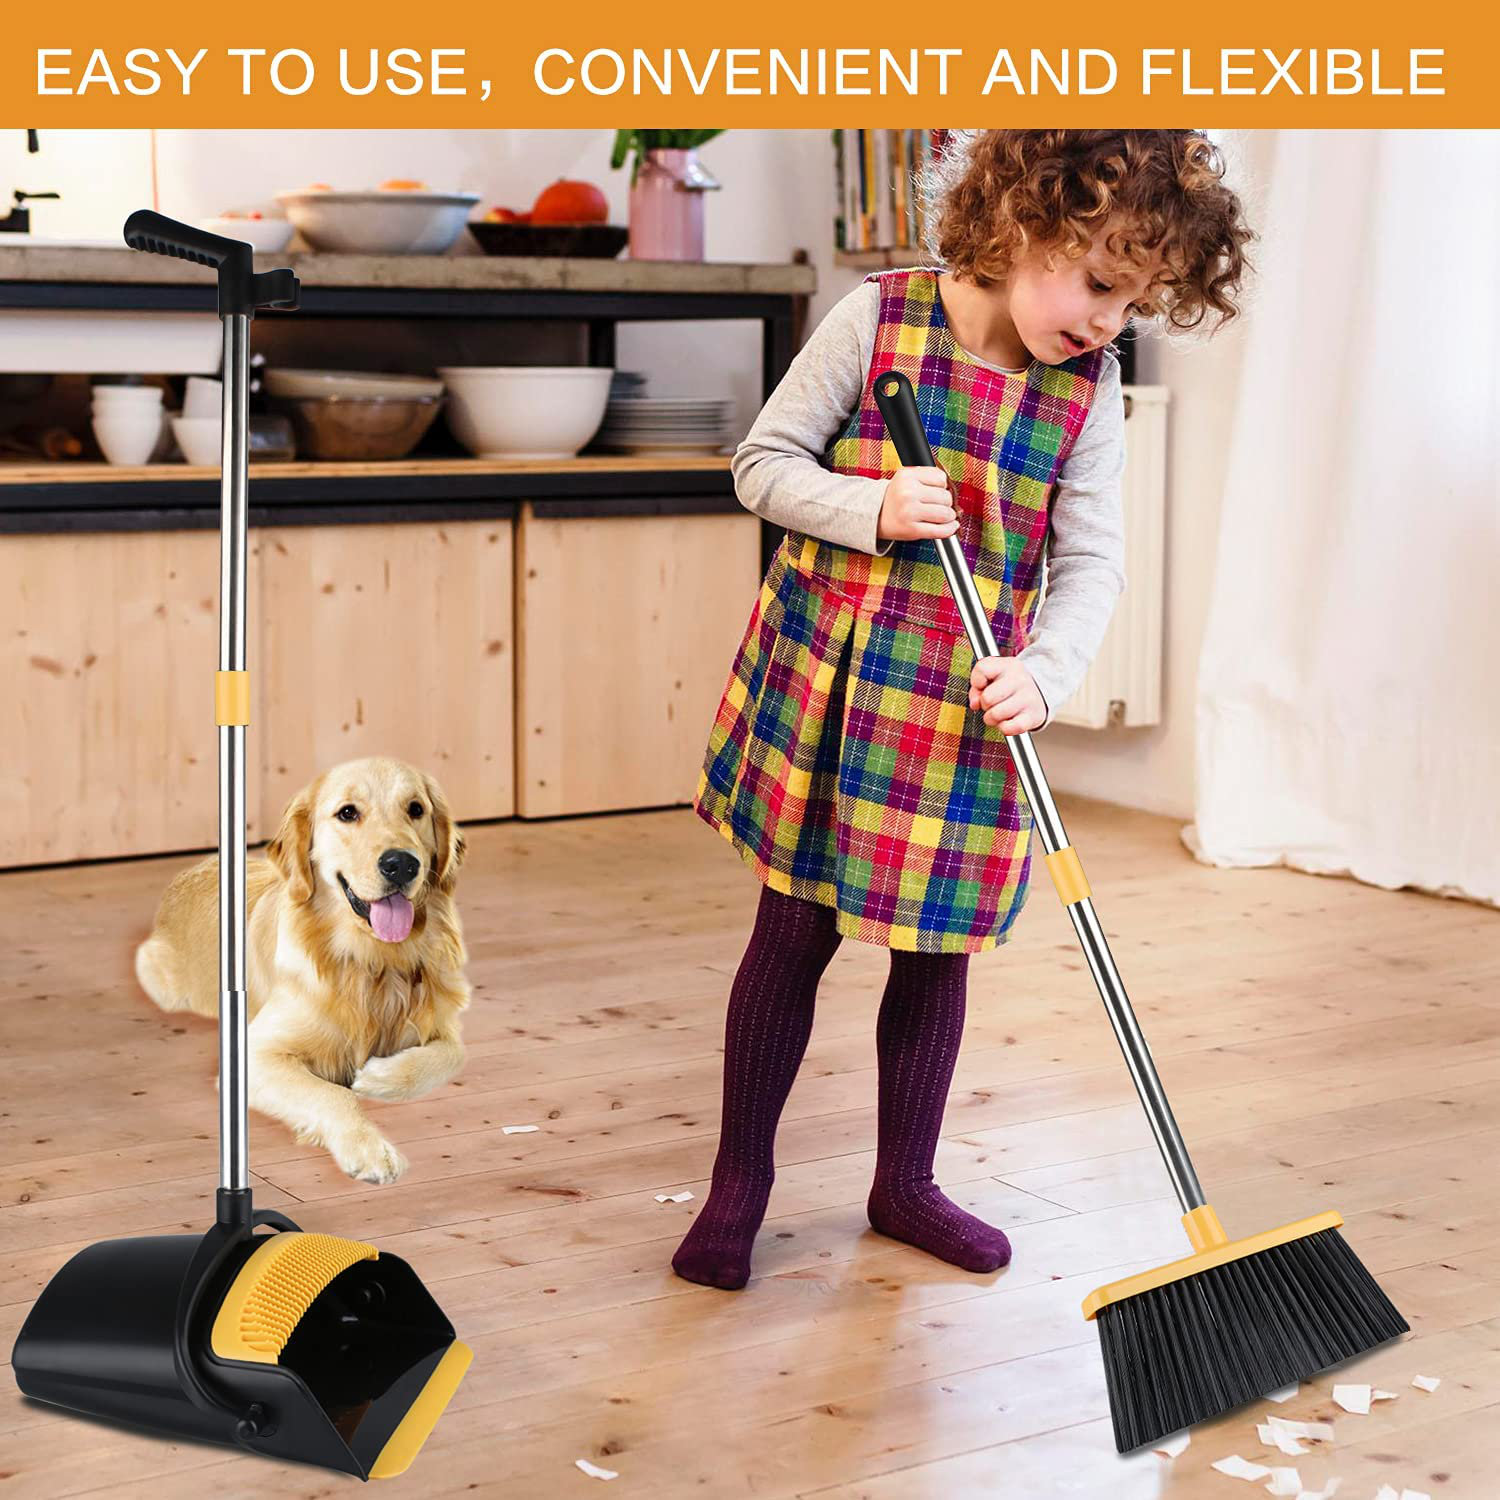 Magnetic Broom and Dustpan Set Cleans with Adjustable 52 Long Handle for Home Room Kitchen Office Lobby Floor Use Upright Stand Up Broom Dustpan Combo…